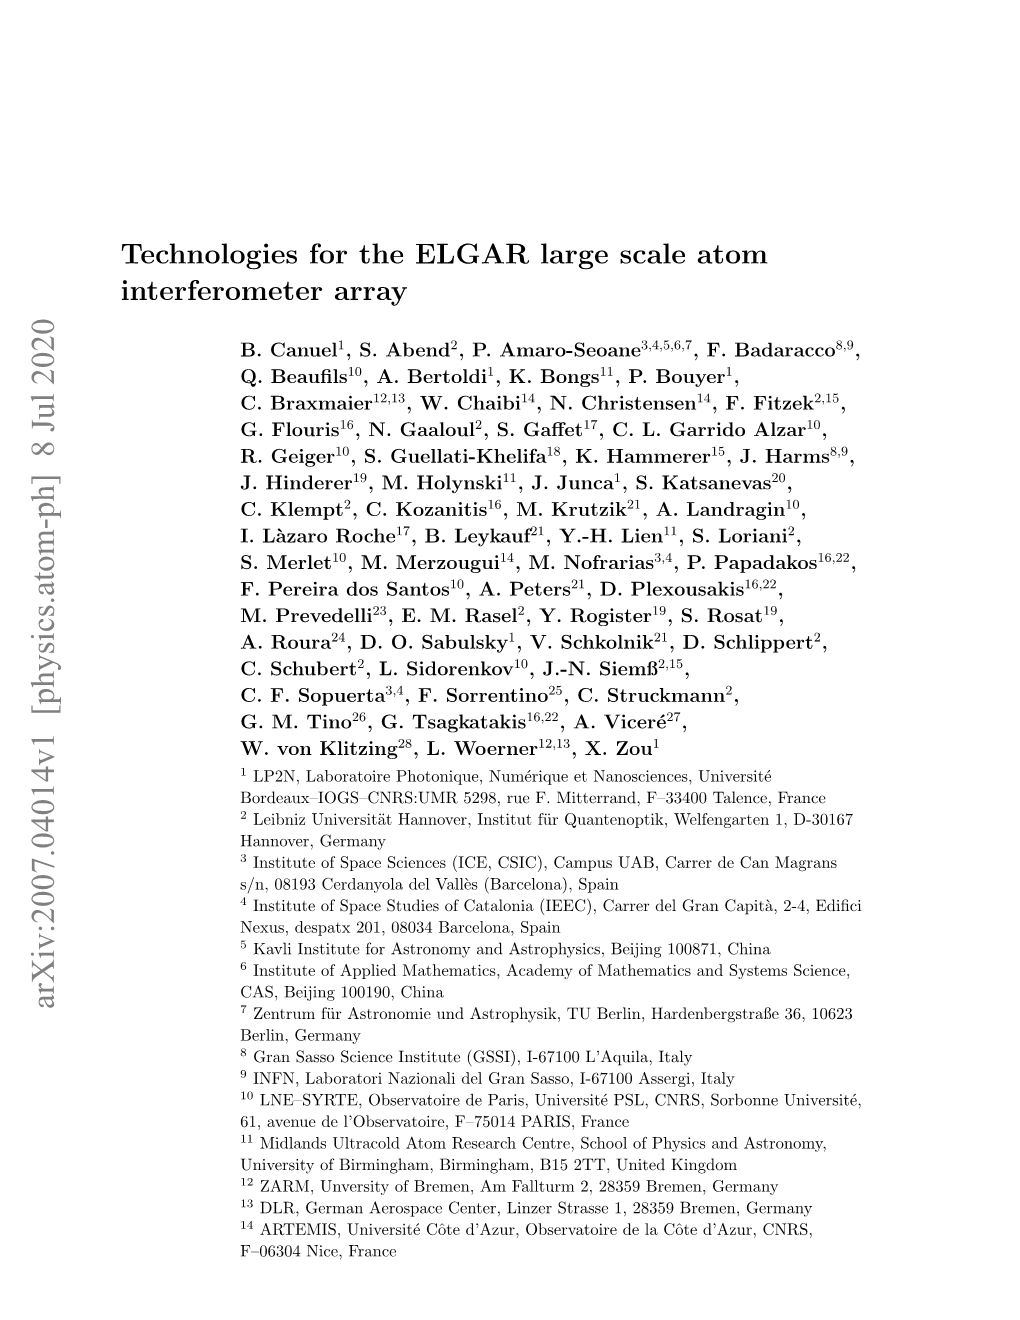 Technologies for the ELGAR Large Scale Atom Interferometer Array